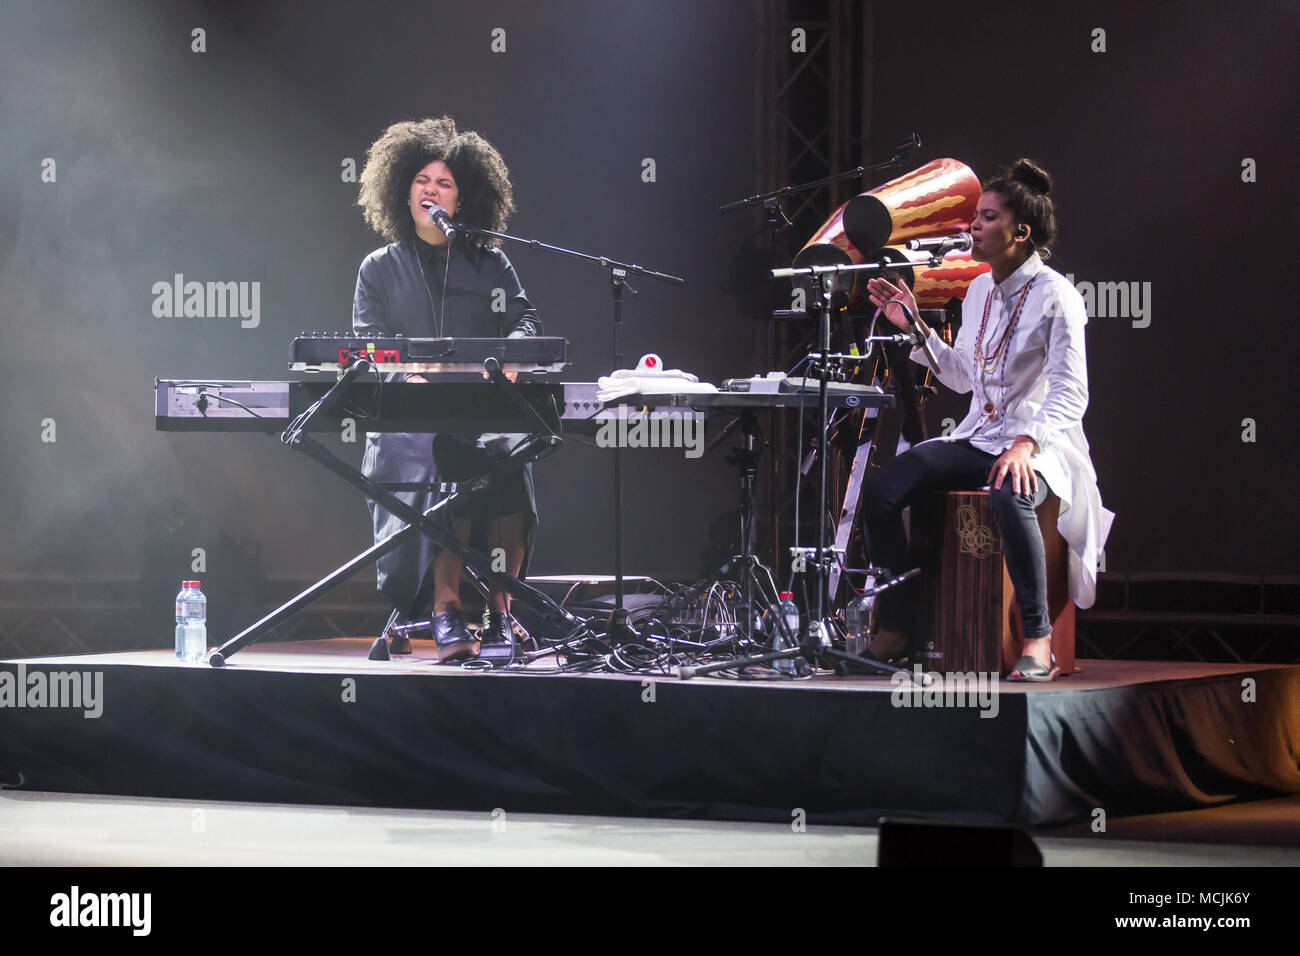 The French-Cuban music duo Ibeyi, which consists of the twin sisters Lisa-Kaindé and Naomi Díaz, will perform live at the Blue Stock Photo